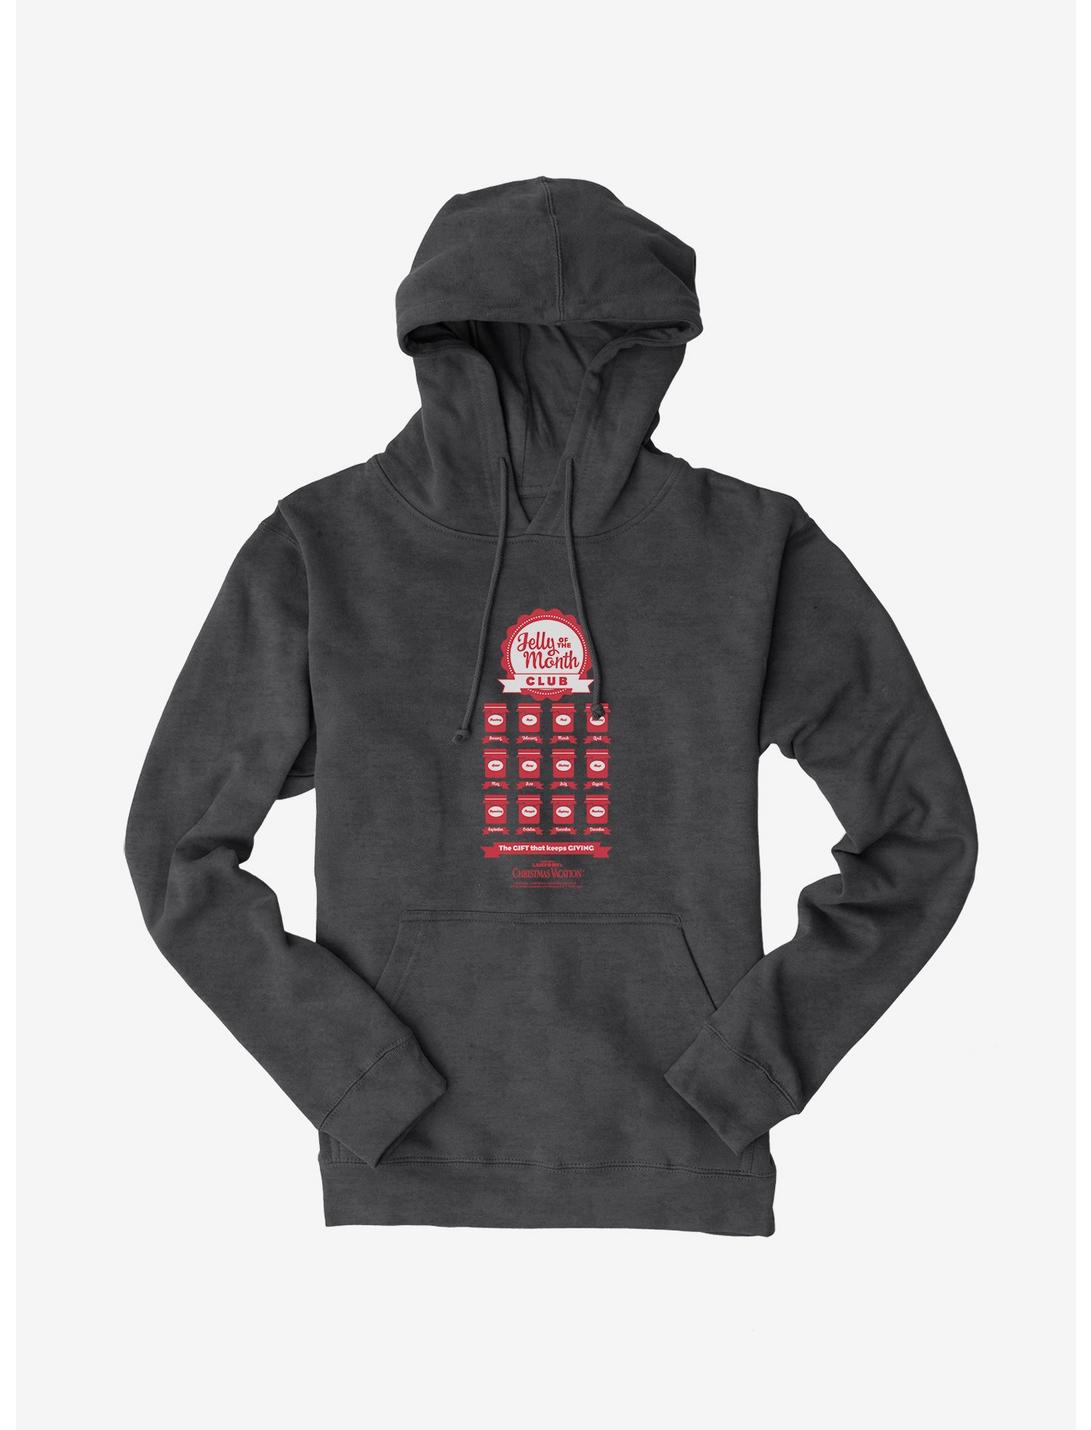 Christmas Vacation Month Club Hoodie, CHARCOAL HEATHER, hi-res